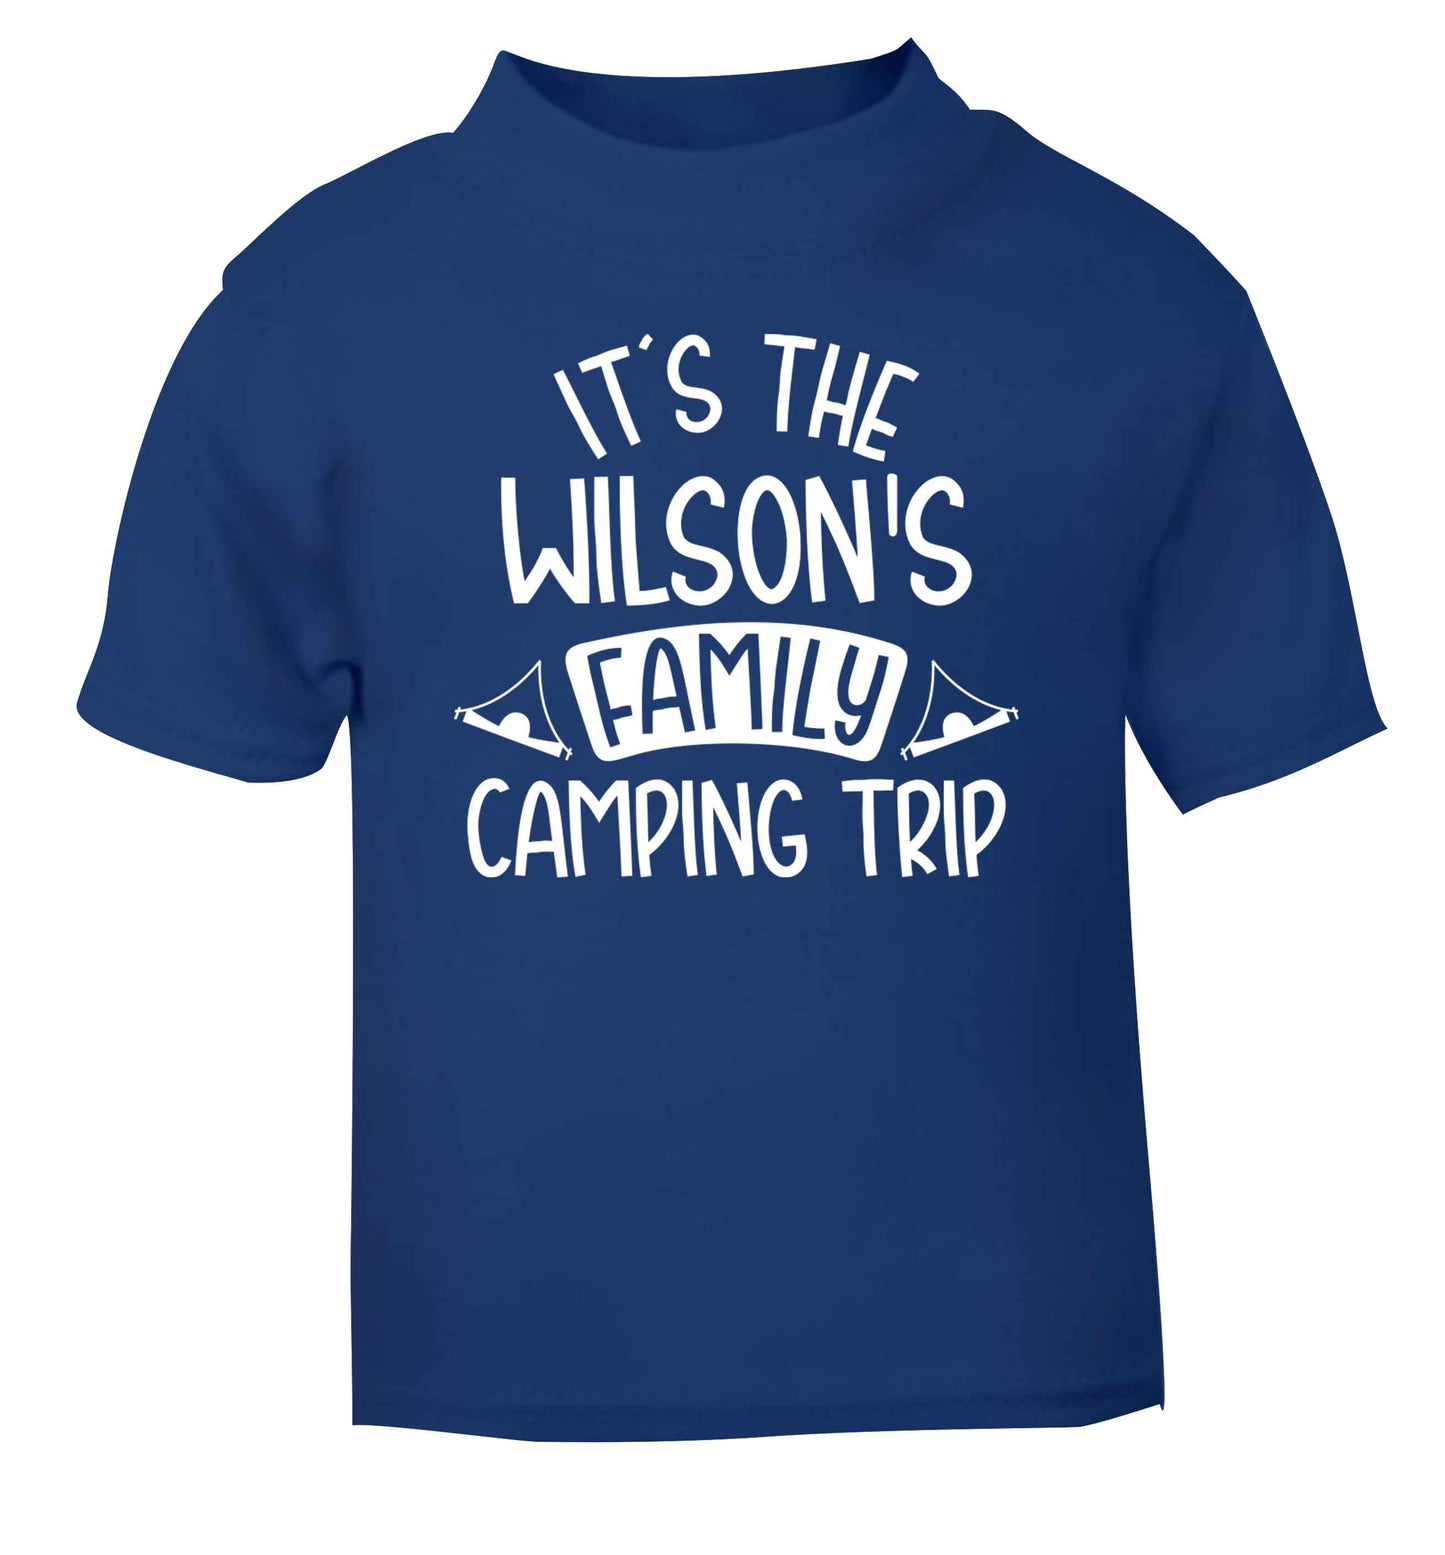 It's the Wilson's family camping trip personalised blue Baby Toddler Tshirt 2 Years